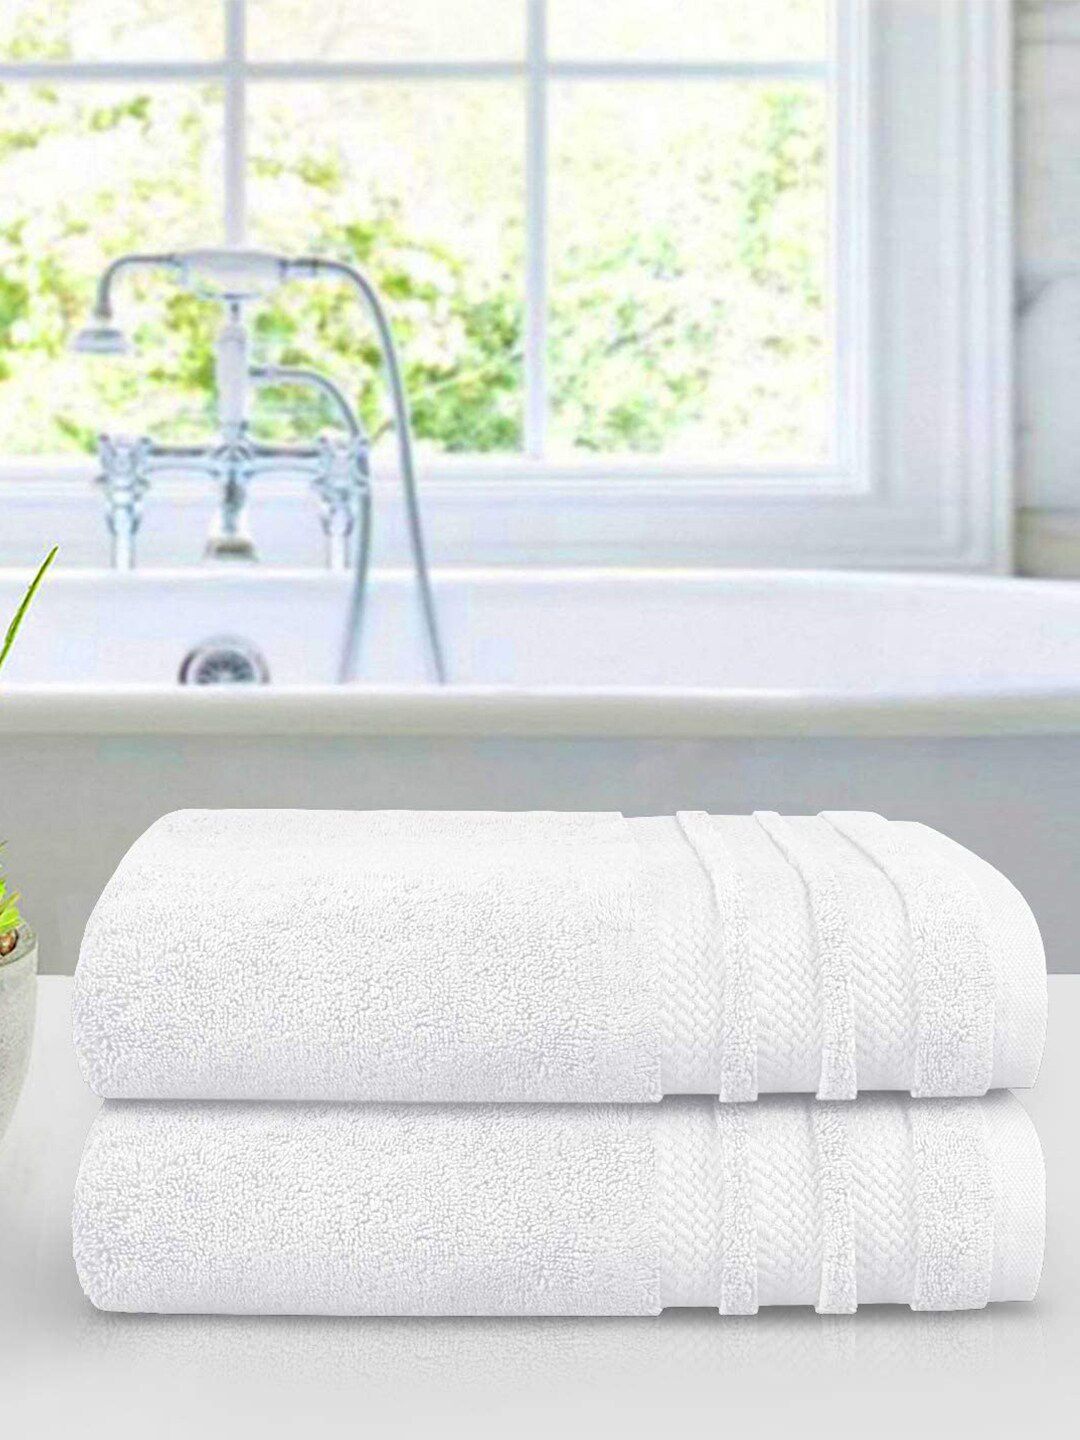 Trident 2 Piece Bath Towel Set White Luxury Collection 100% Cotton 625 GSM Price in India